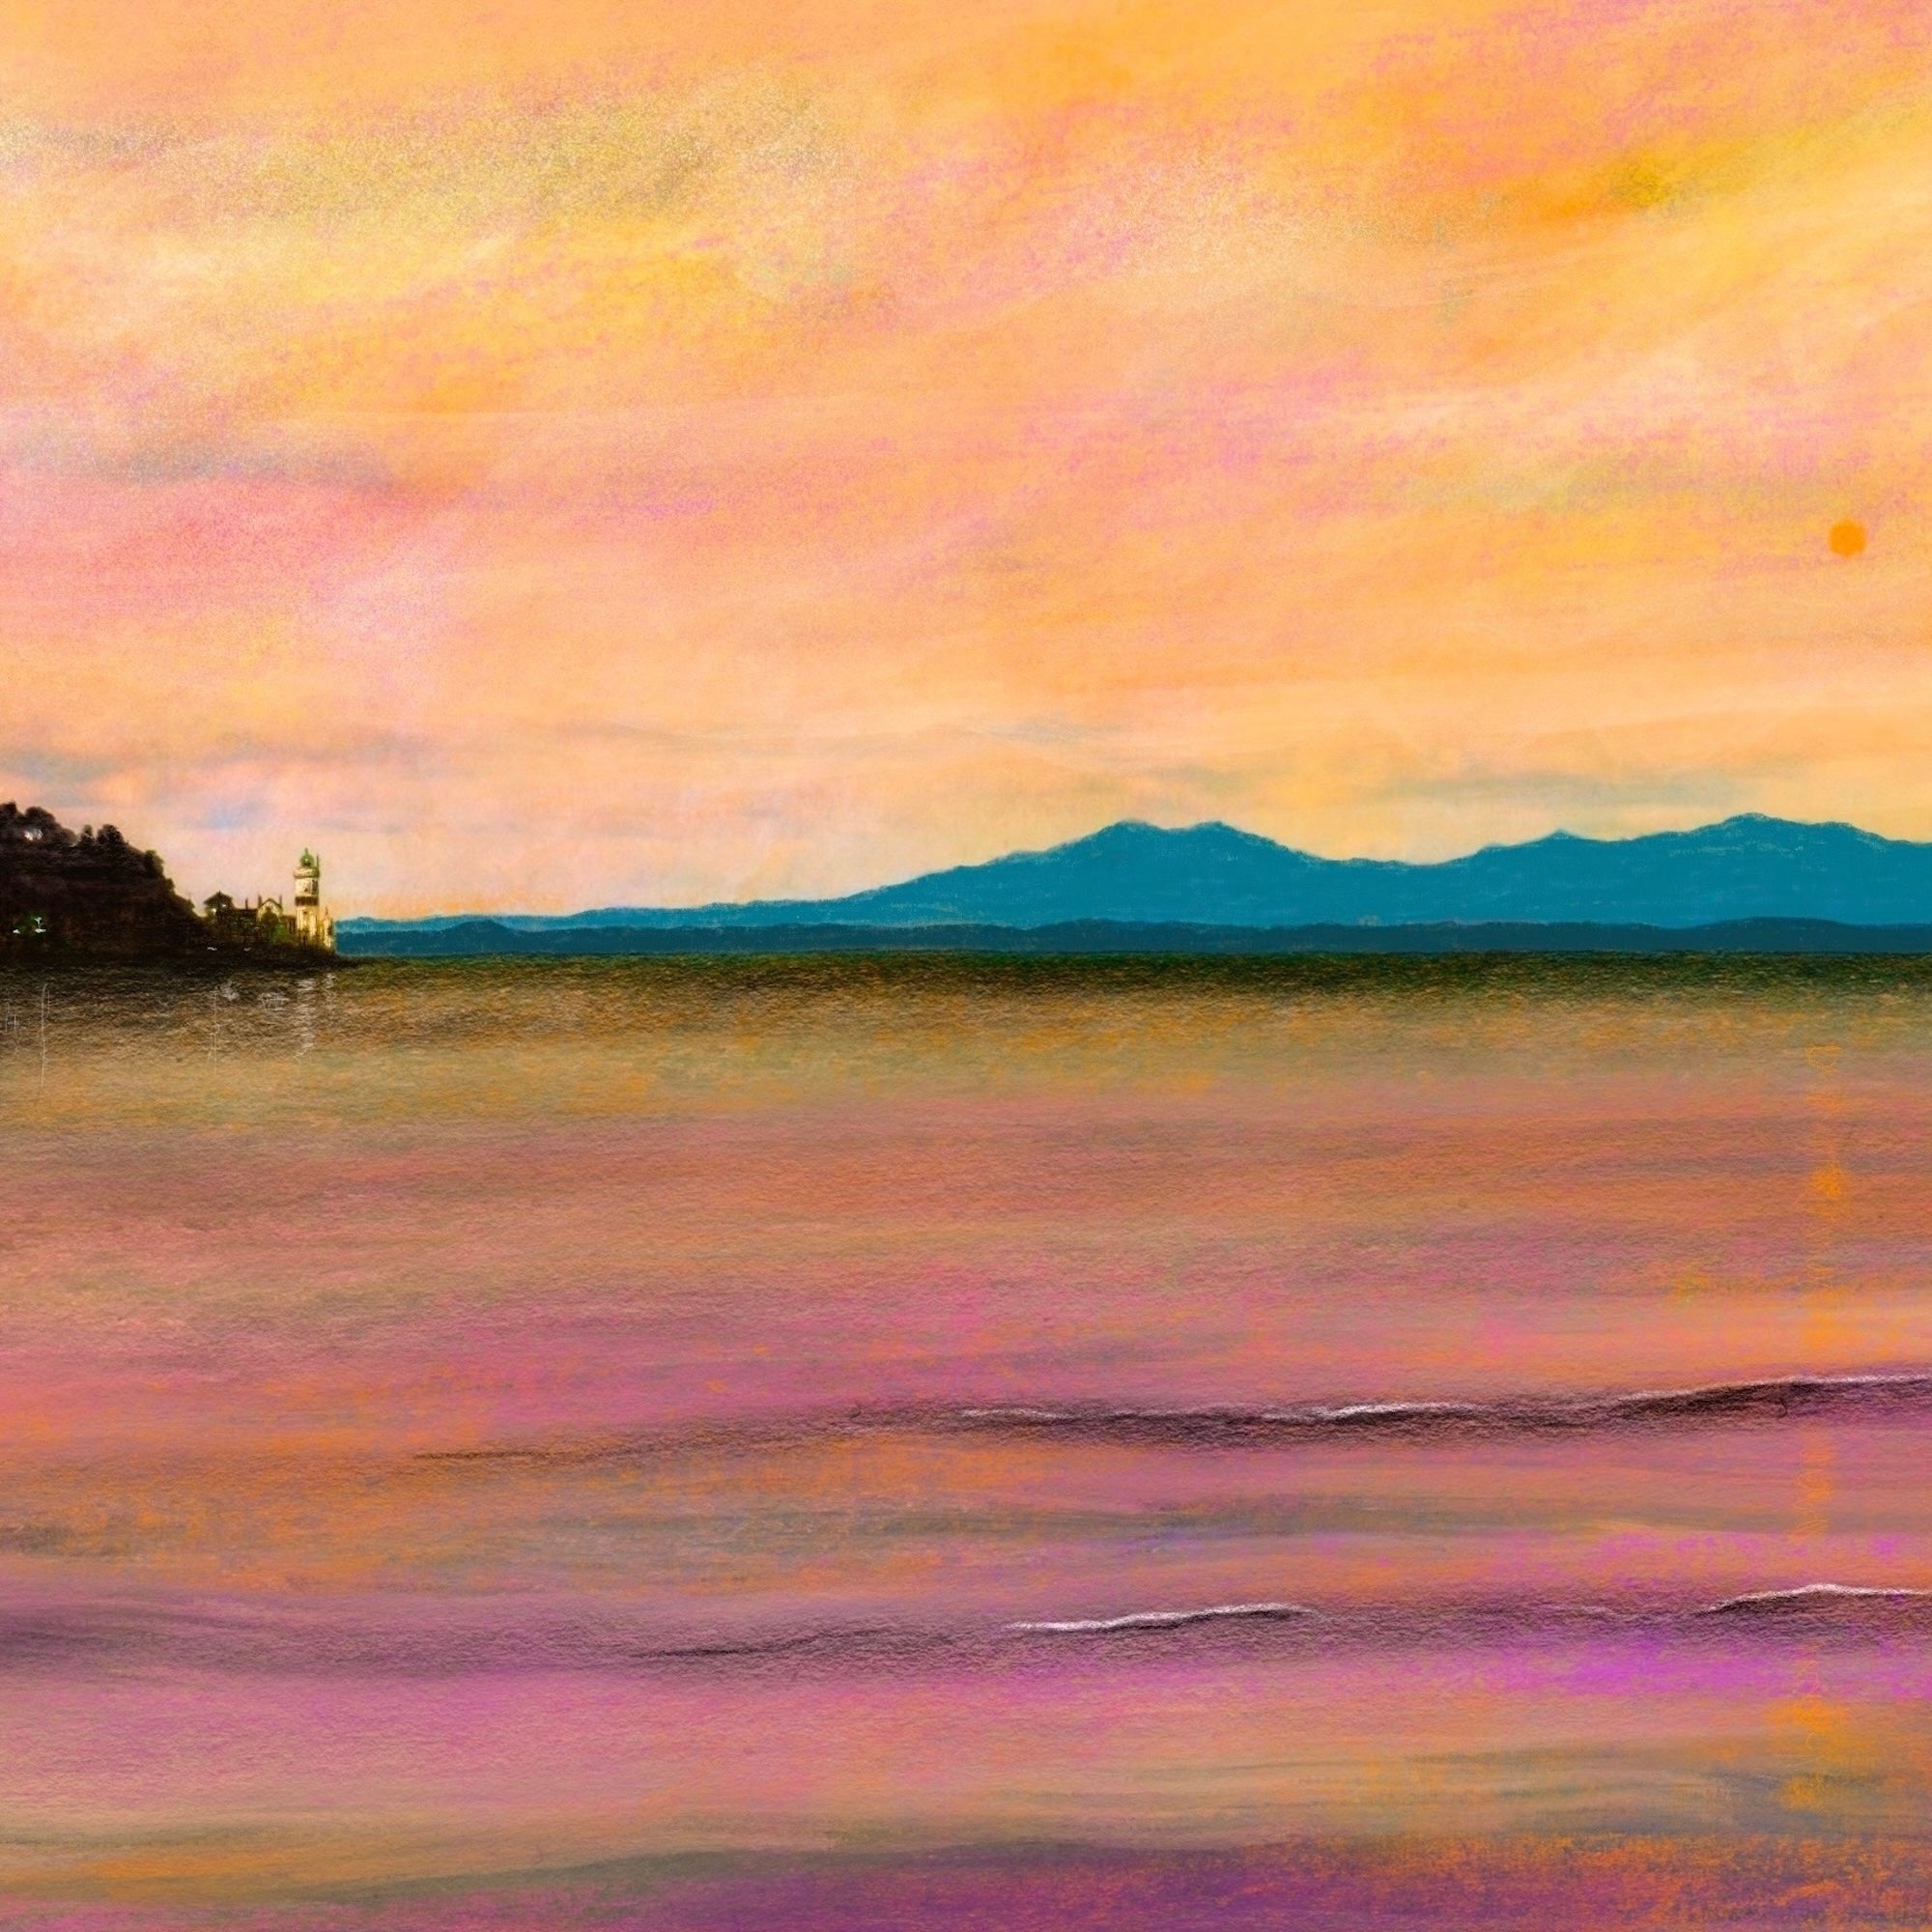 Dusk Over Arran & The Cloch Lighthouse | Scotland In Your Pocket Art Print-Scotland In Your Pocket Framed Prints-Arran Art Gallery-Paintings, Prints, Homeware, Art Gifts From Scotland By Scottish Artist Kevin Hunter